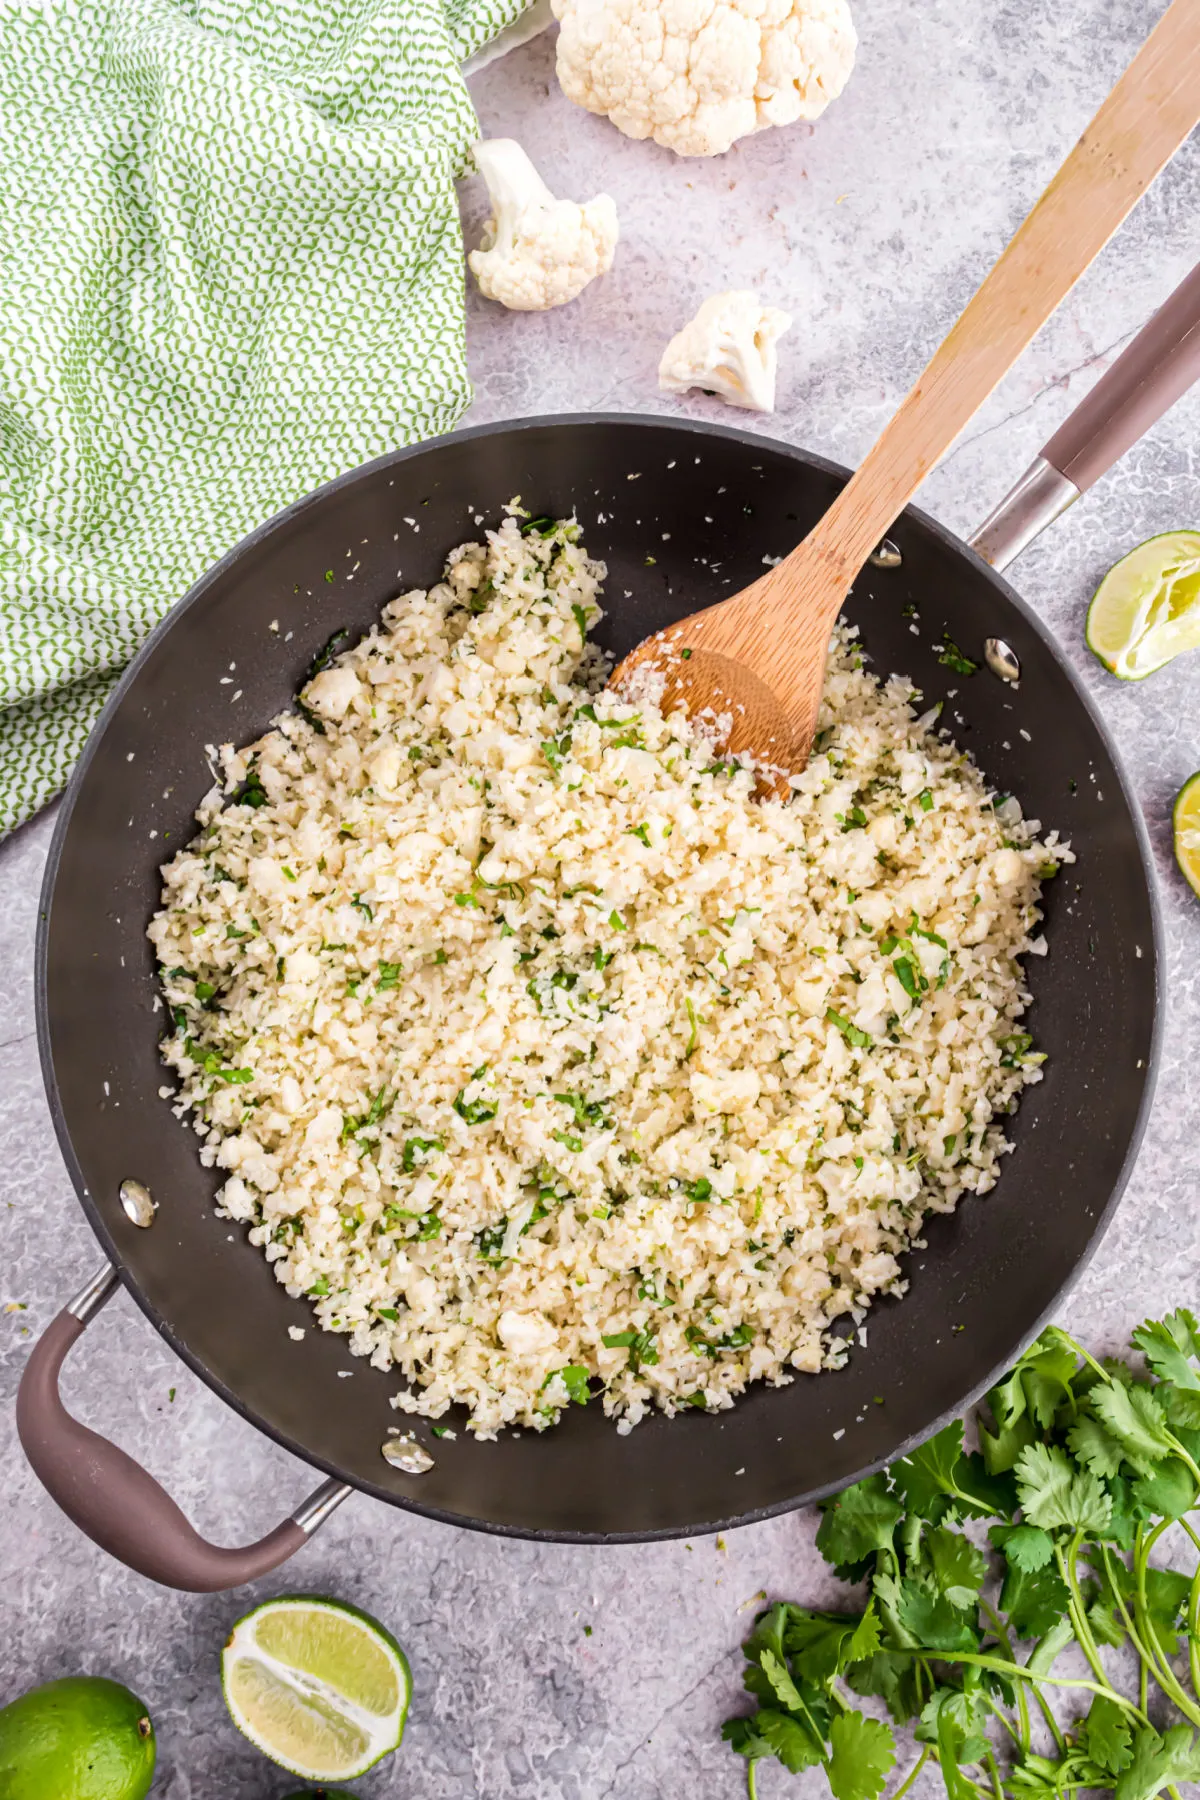 Skillet cooking cauliflower rice with cilantro and lime juice.